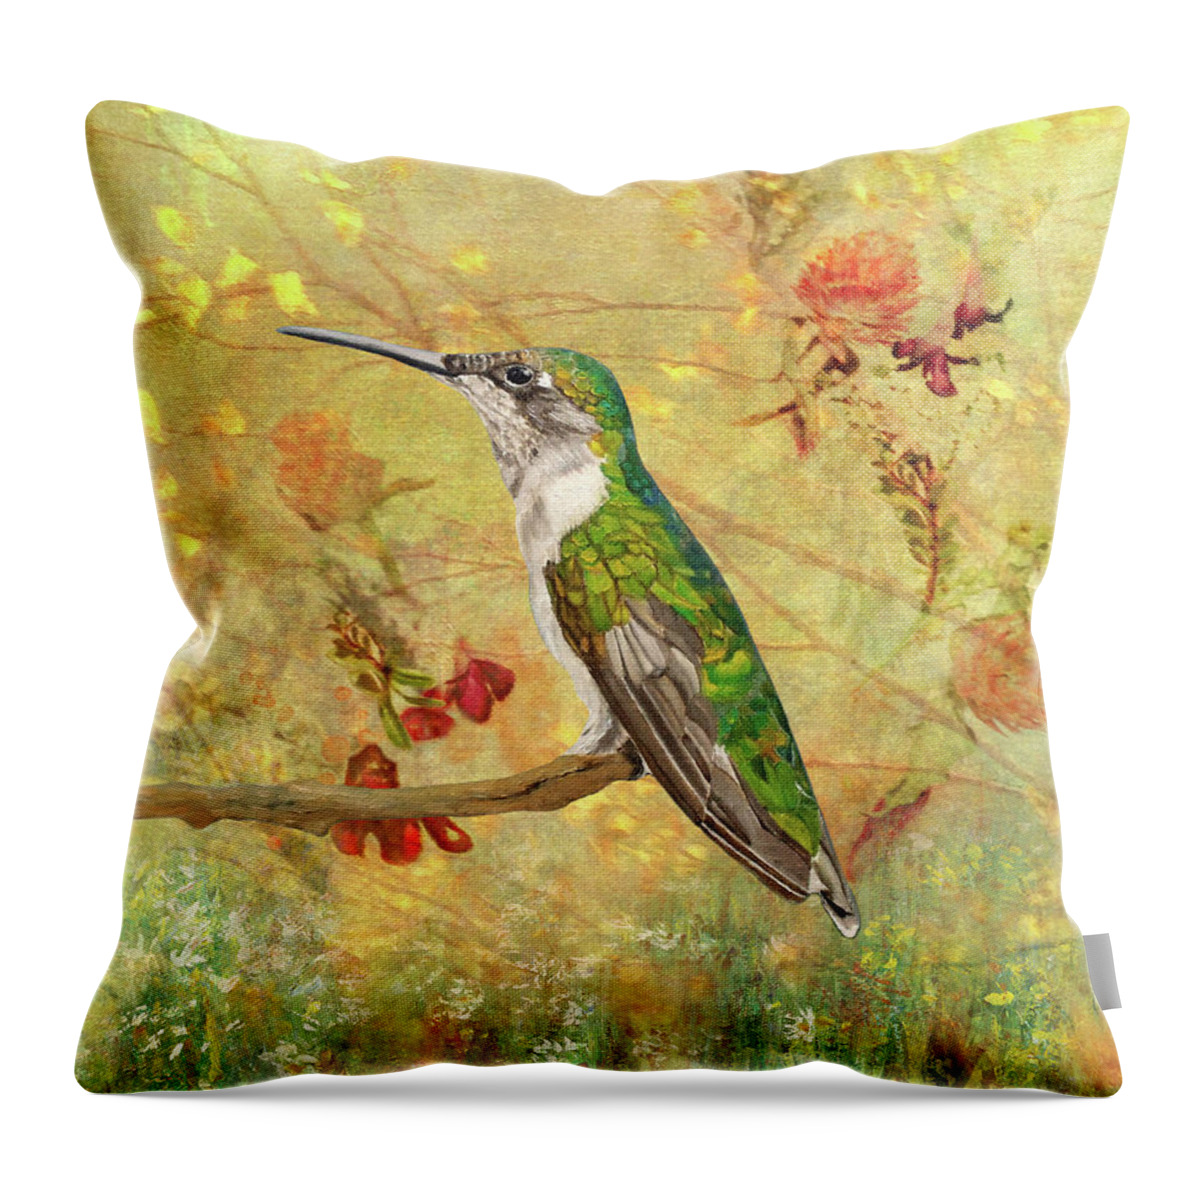 Hummingbird Throw Pillow featuring the painting Heart Of The Forest by Angeles M Pomata